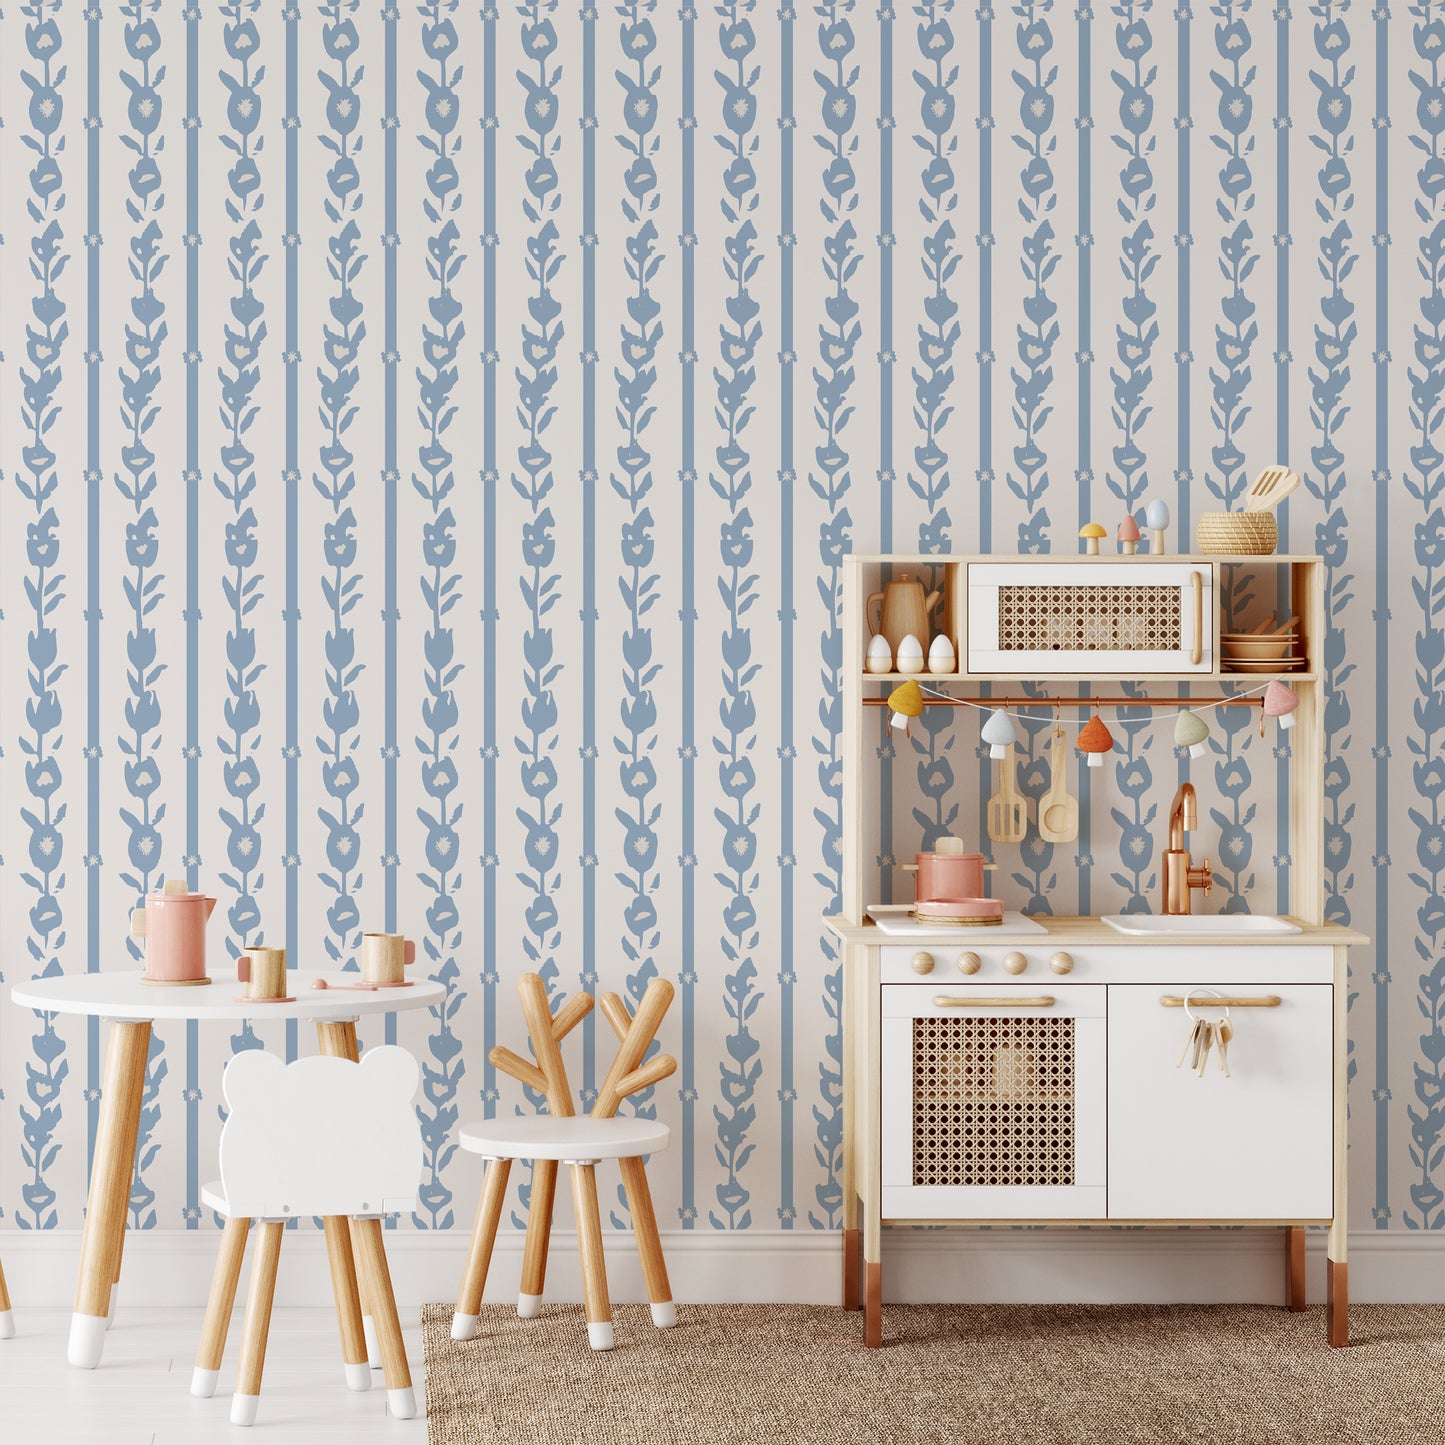 Playroom wall featuring our oversized floral and stripe Esme peel and stick wallpaper in light blue, grey, and off white by Jackie O'Bosky.